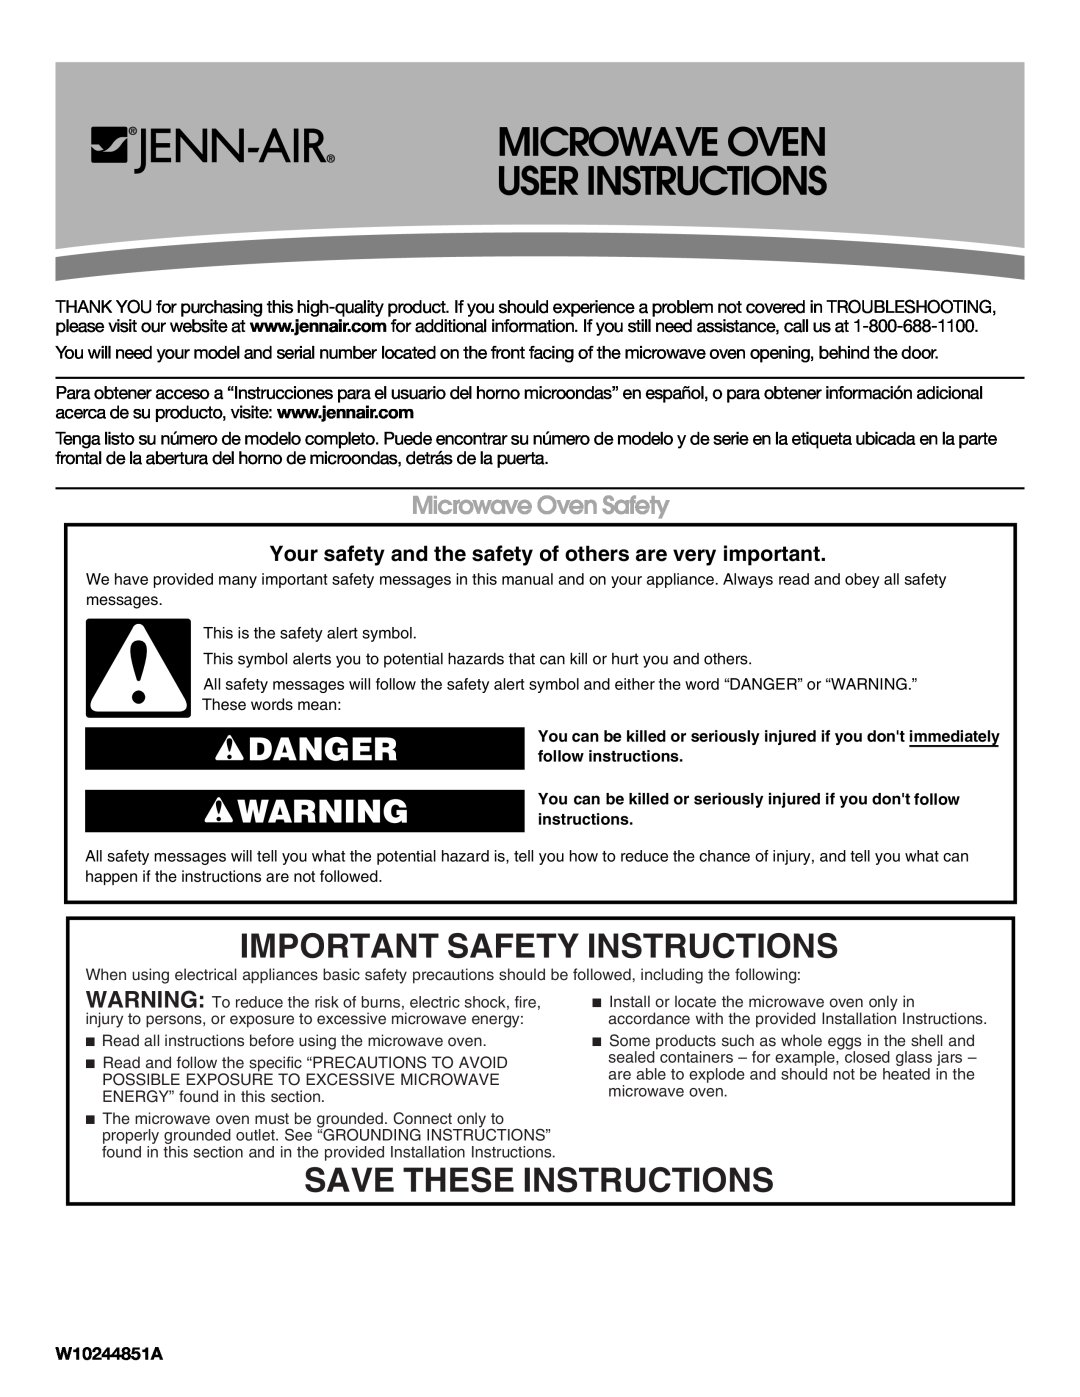 Jenn-Air W10244851A important safety instructions Important Safety Instructions, Save These Instructions, Danger 